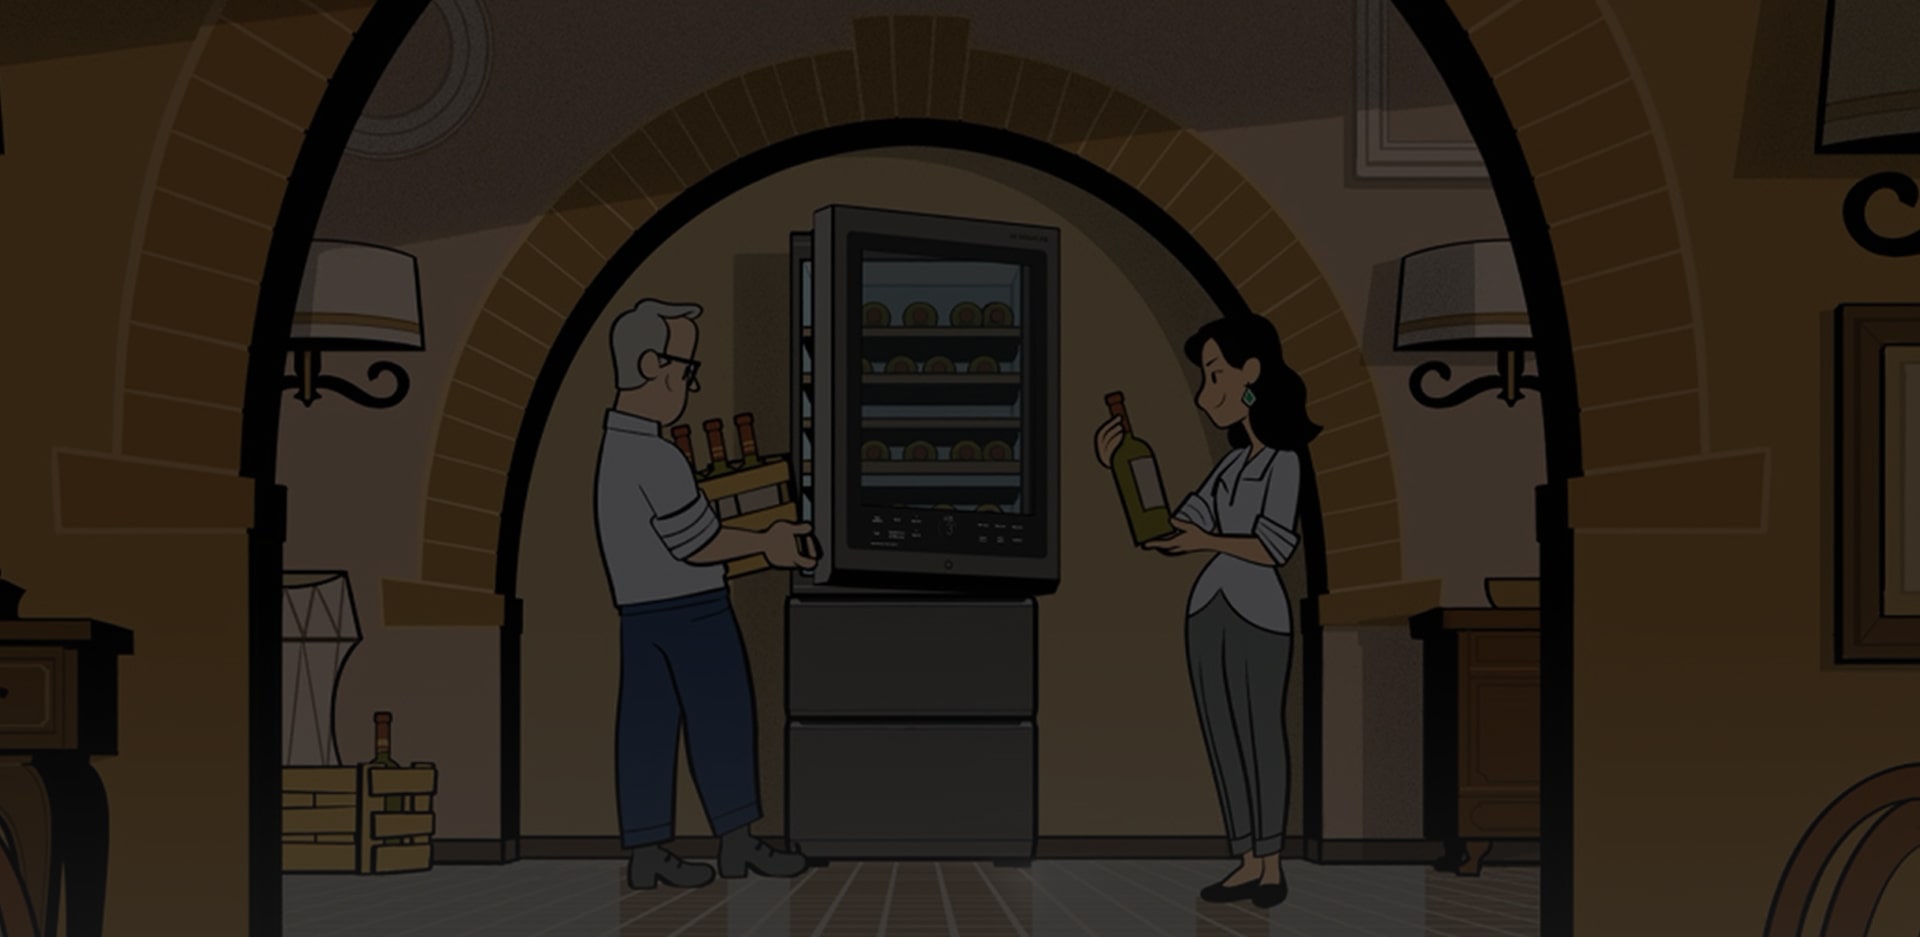 Illust image of LG SIGNATURE Wine Cellar's auto open door feature with James Suckling and his wife.